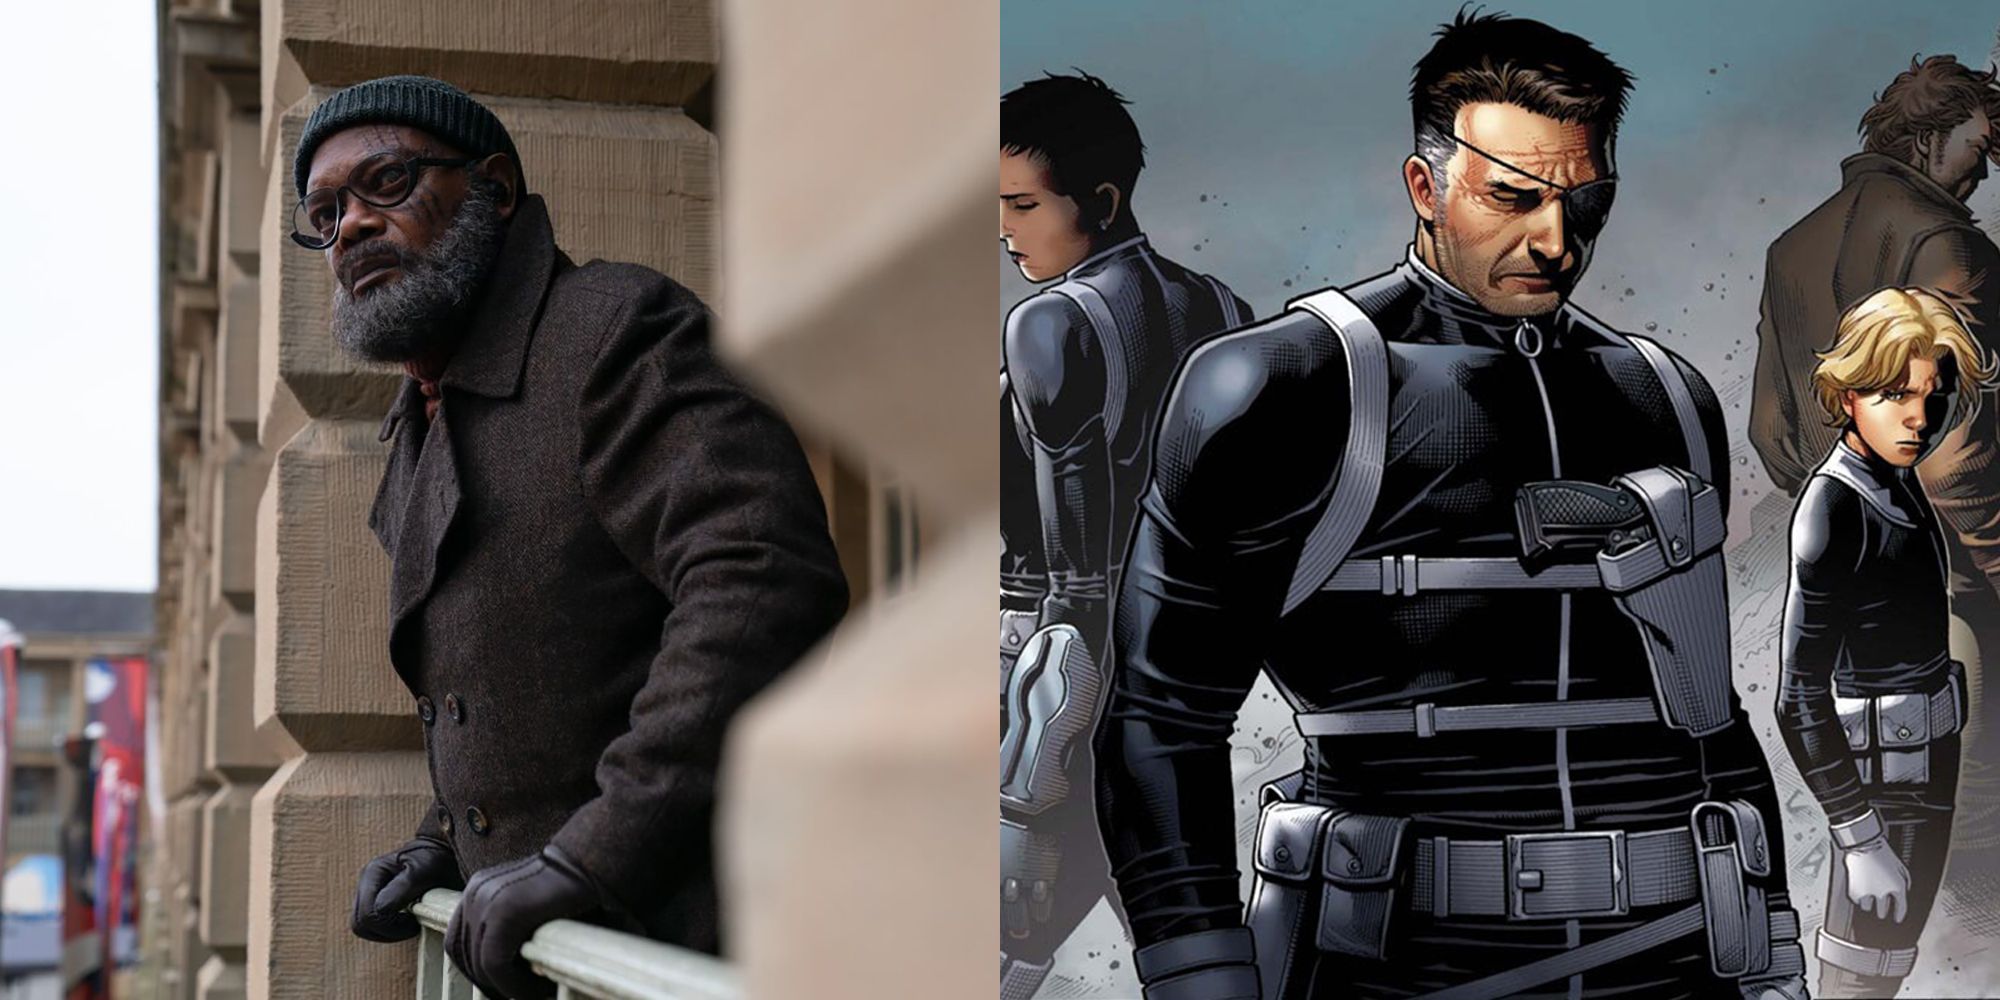 nick fury played by samuel l. jackson and nick fury sr from the comics